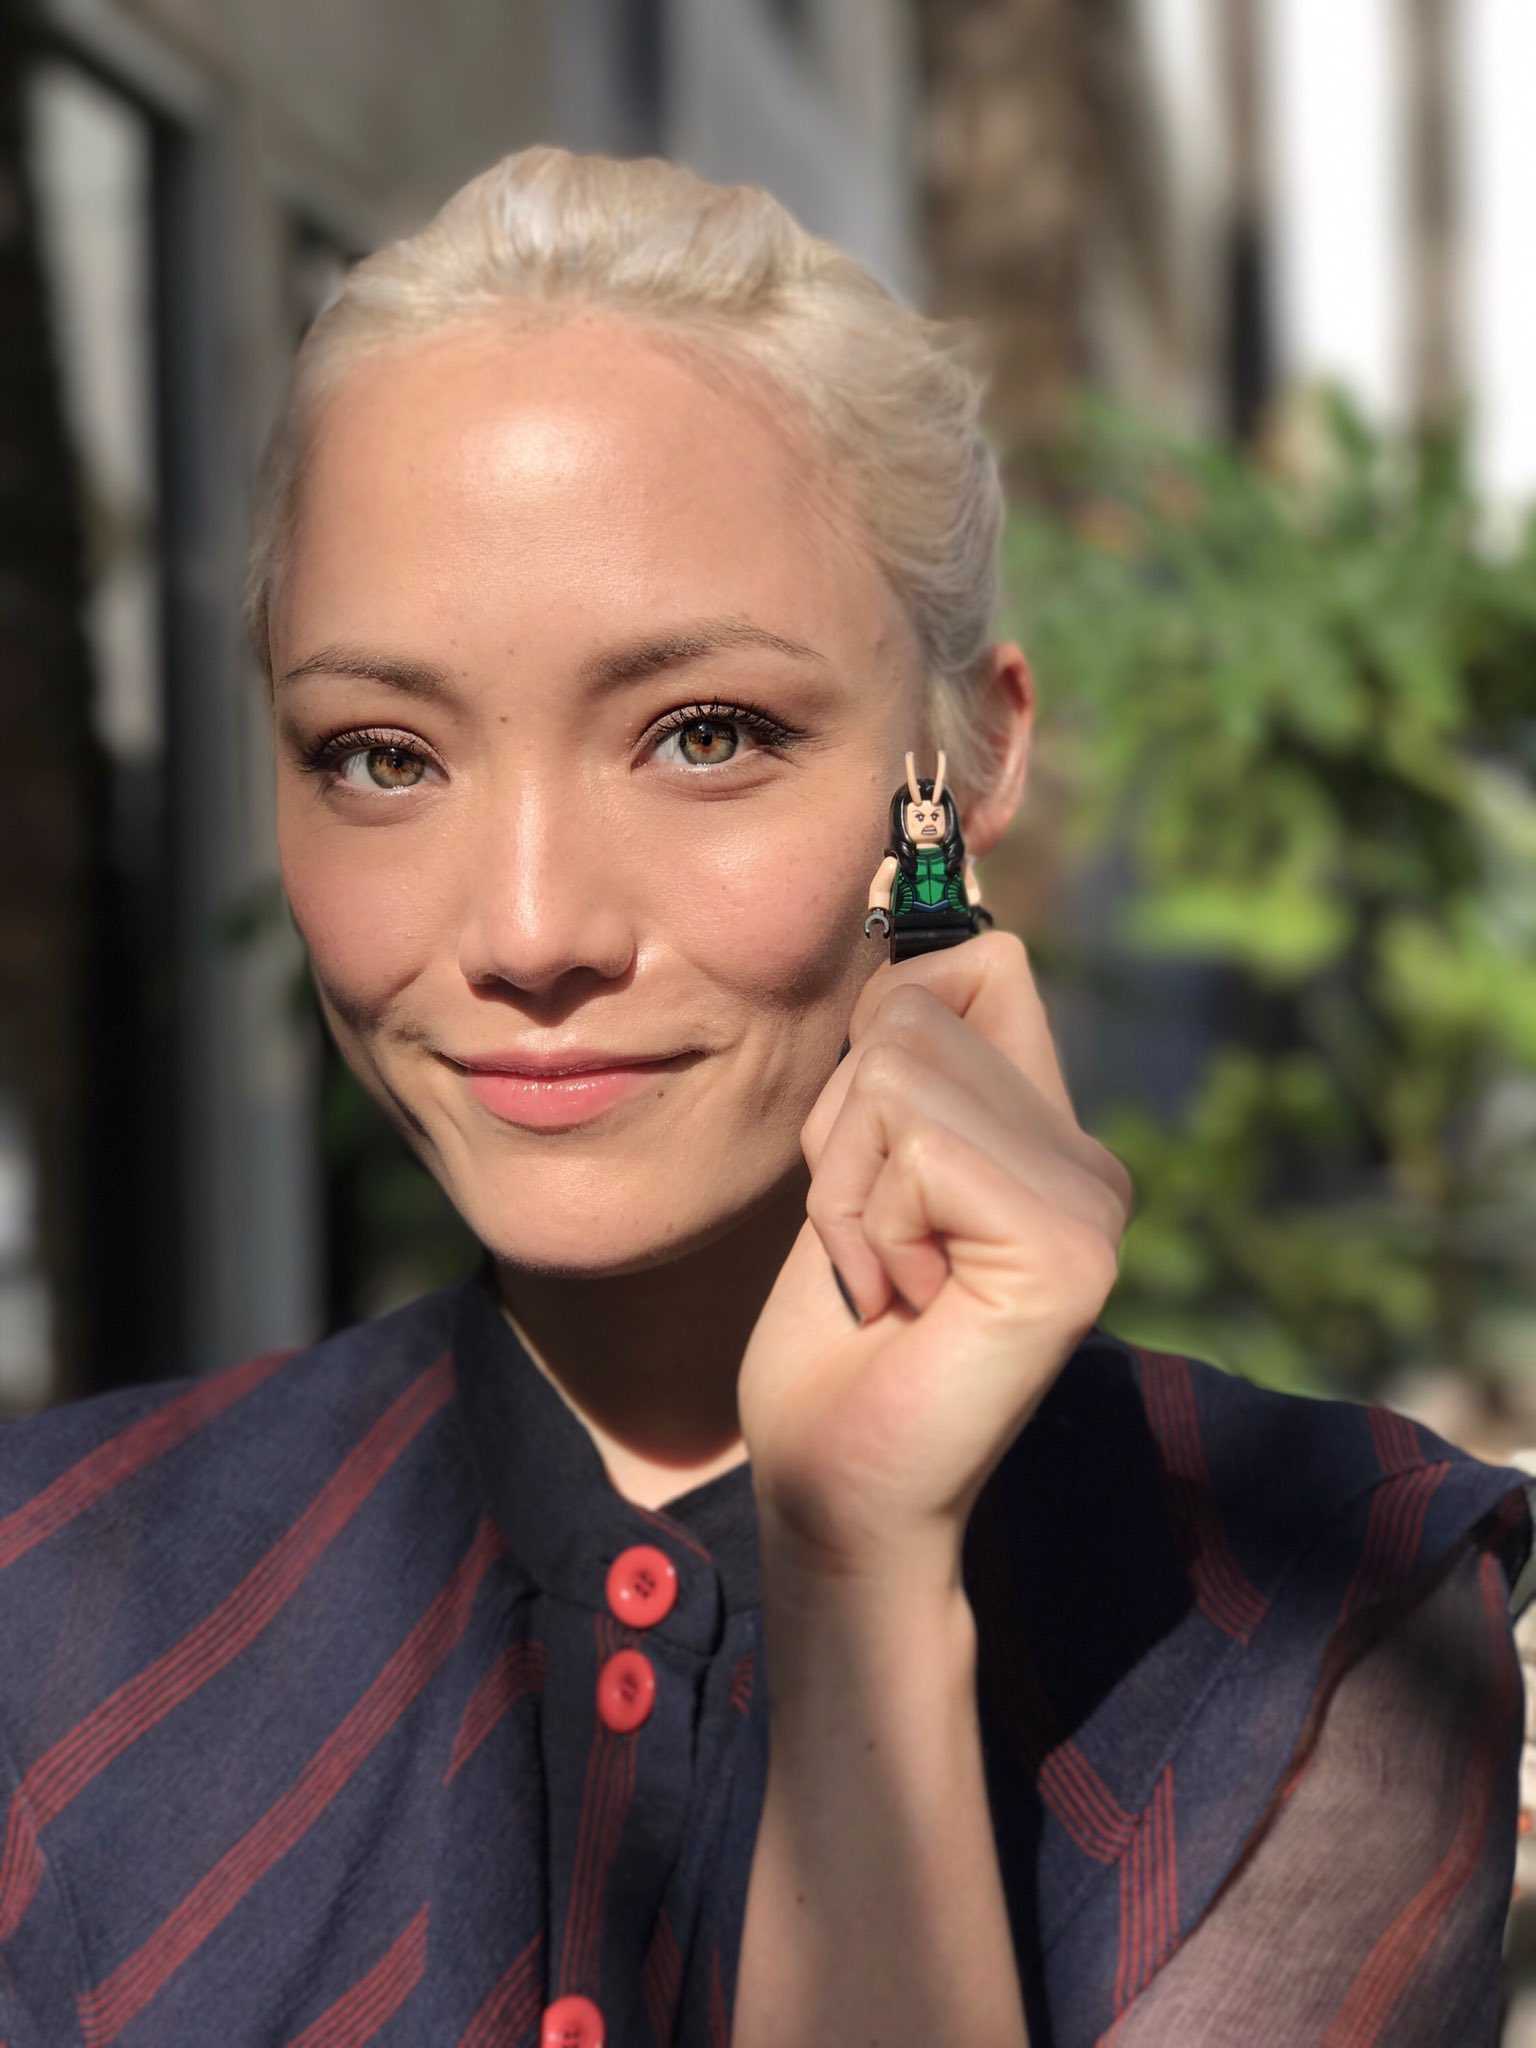 70+ Hot Pictures Of Pom Klementieff Who Plays Mantis In Marvel Cinematic Universe 117